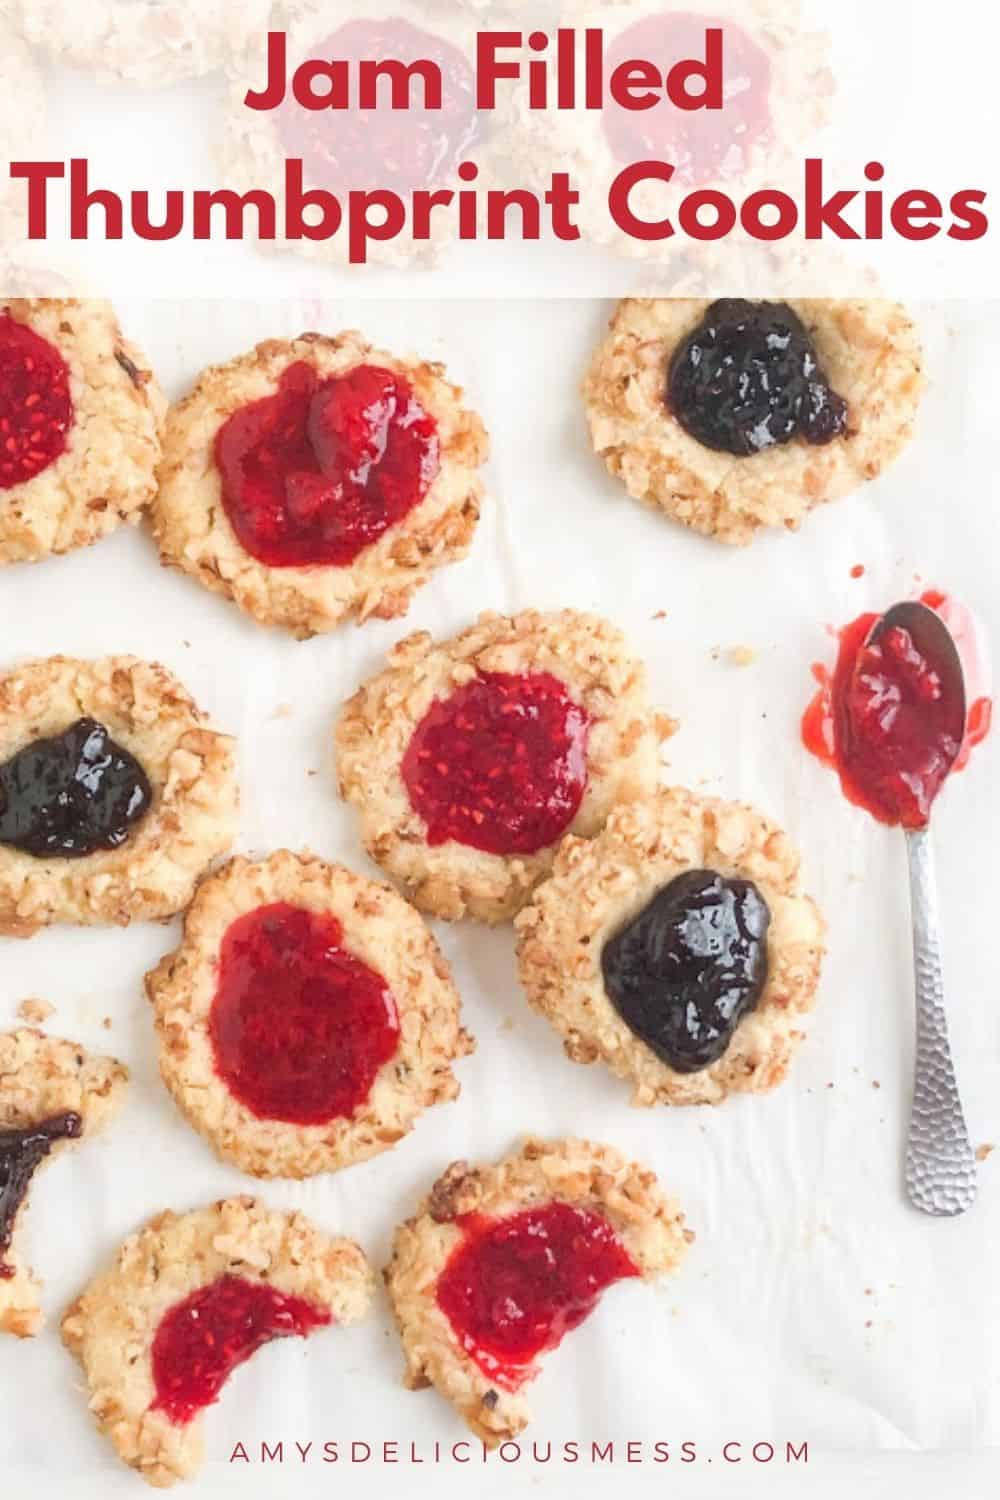 Thumbprint cookies baked and filled with strawberry, raspberry, or black forest cherry jam. Arranged on parchment with bites taken out of 3 coolies with silver cocktail spoon with additional jam next to the cookies.